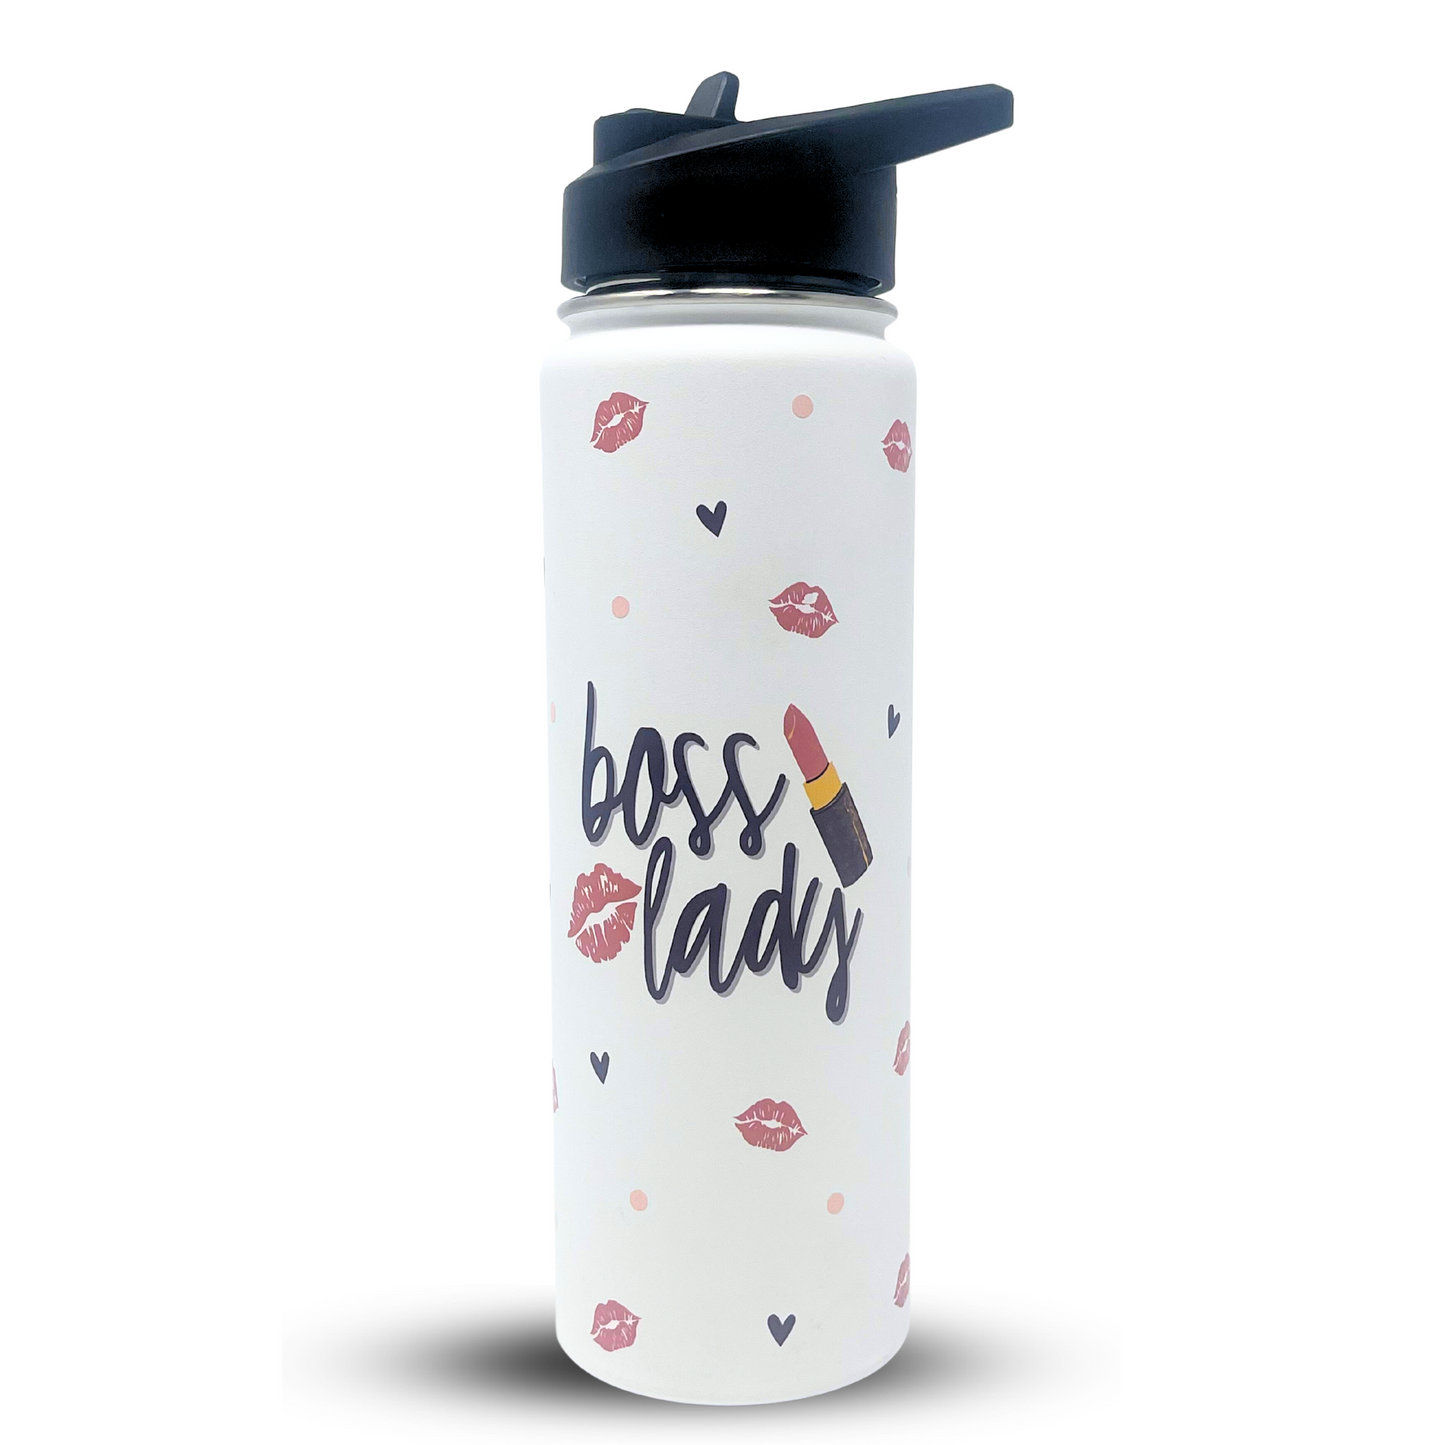 Boss Lady Water Bottle - Best Boss Gifts for Women - Great Travel Tumbler Gifts for Bosses, Coworkers, Mom, Christmas, Birthday